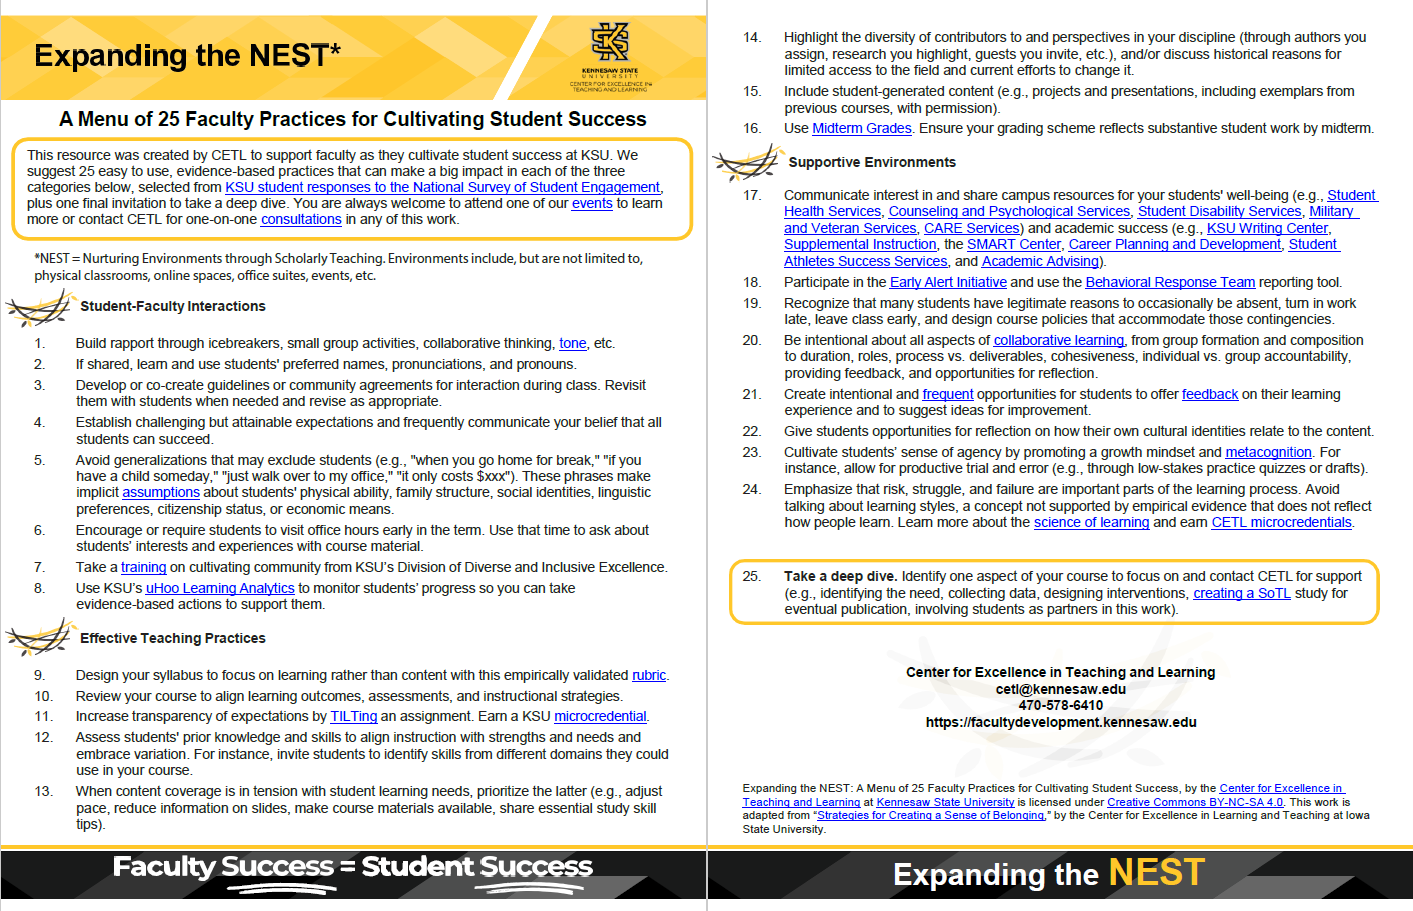 screenshot of the Expanding the NEST pdf document